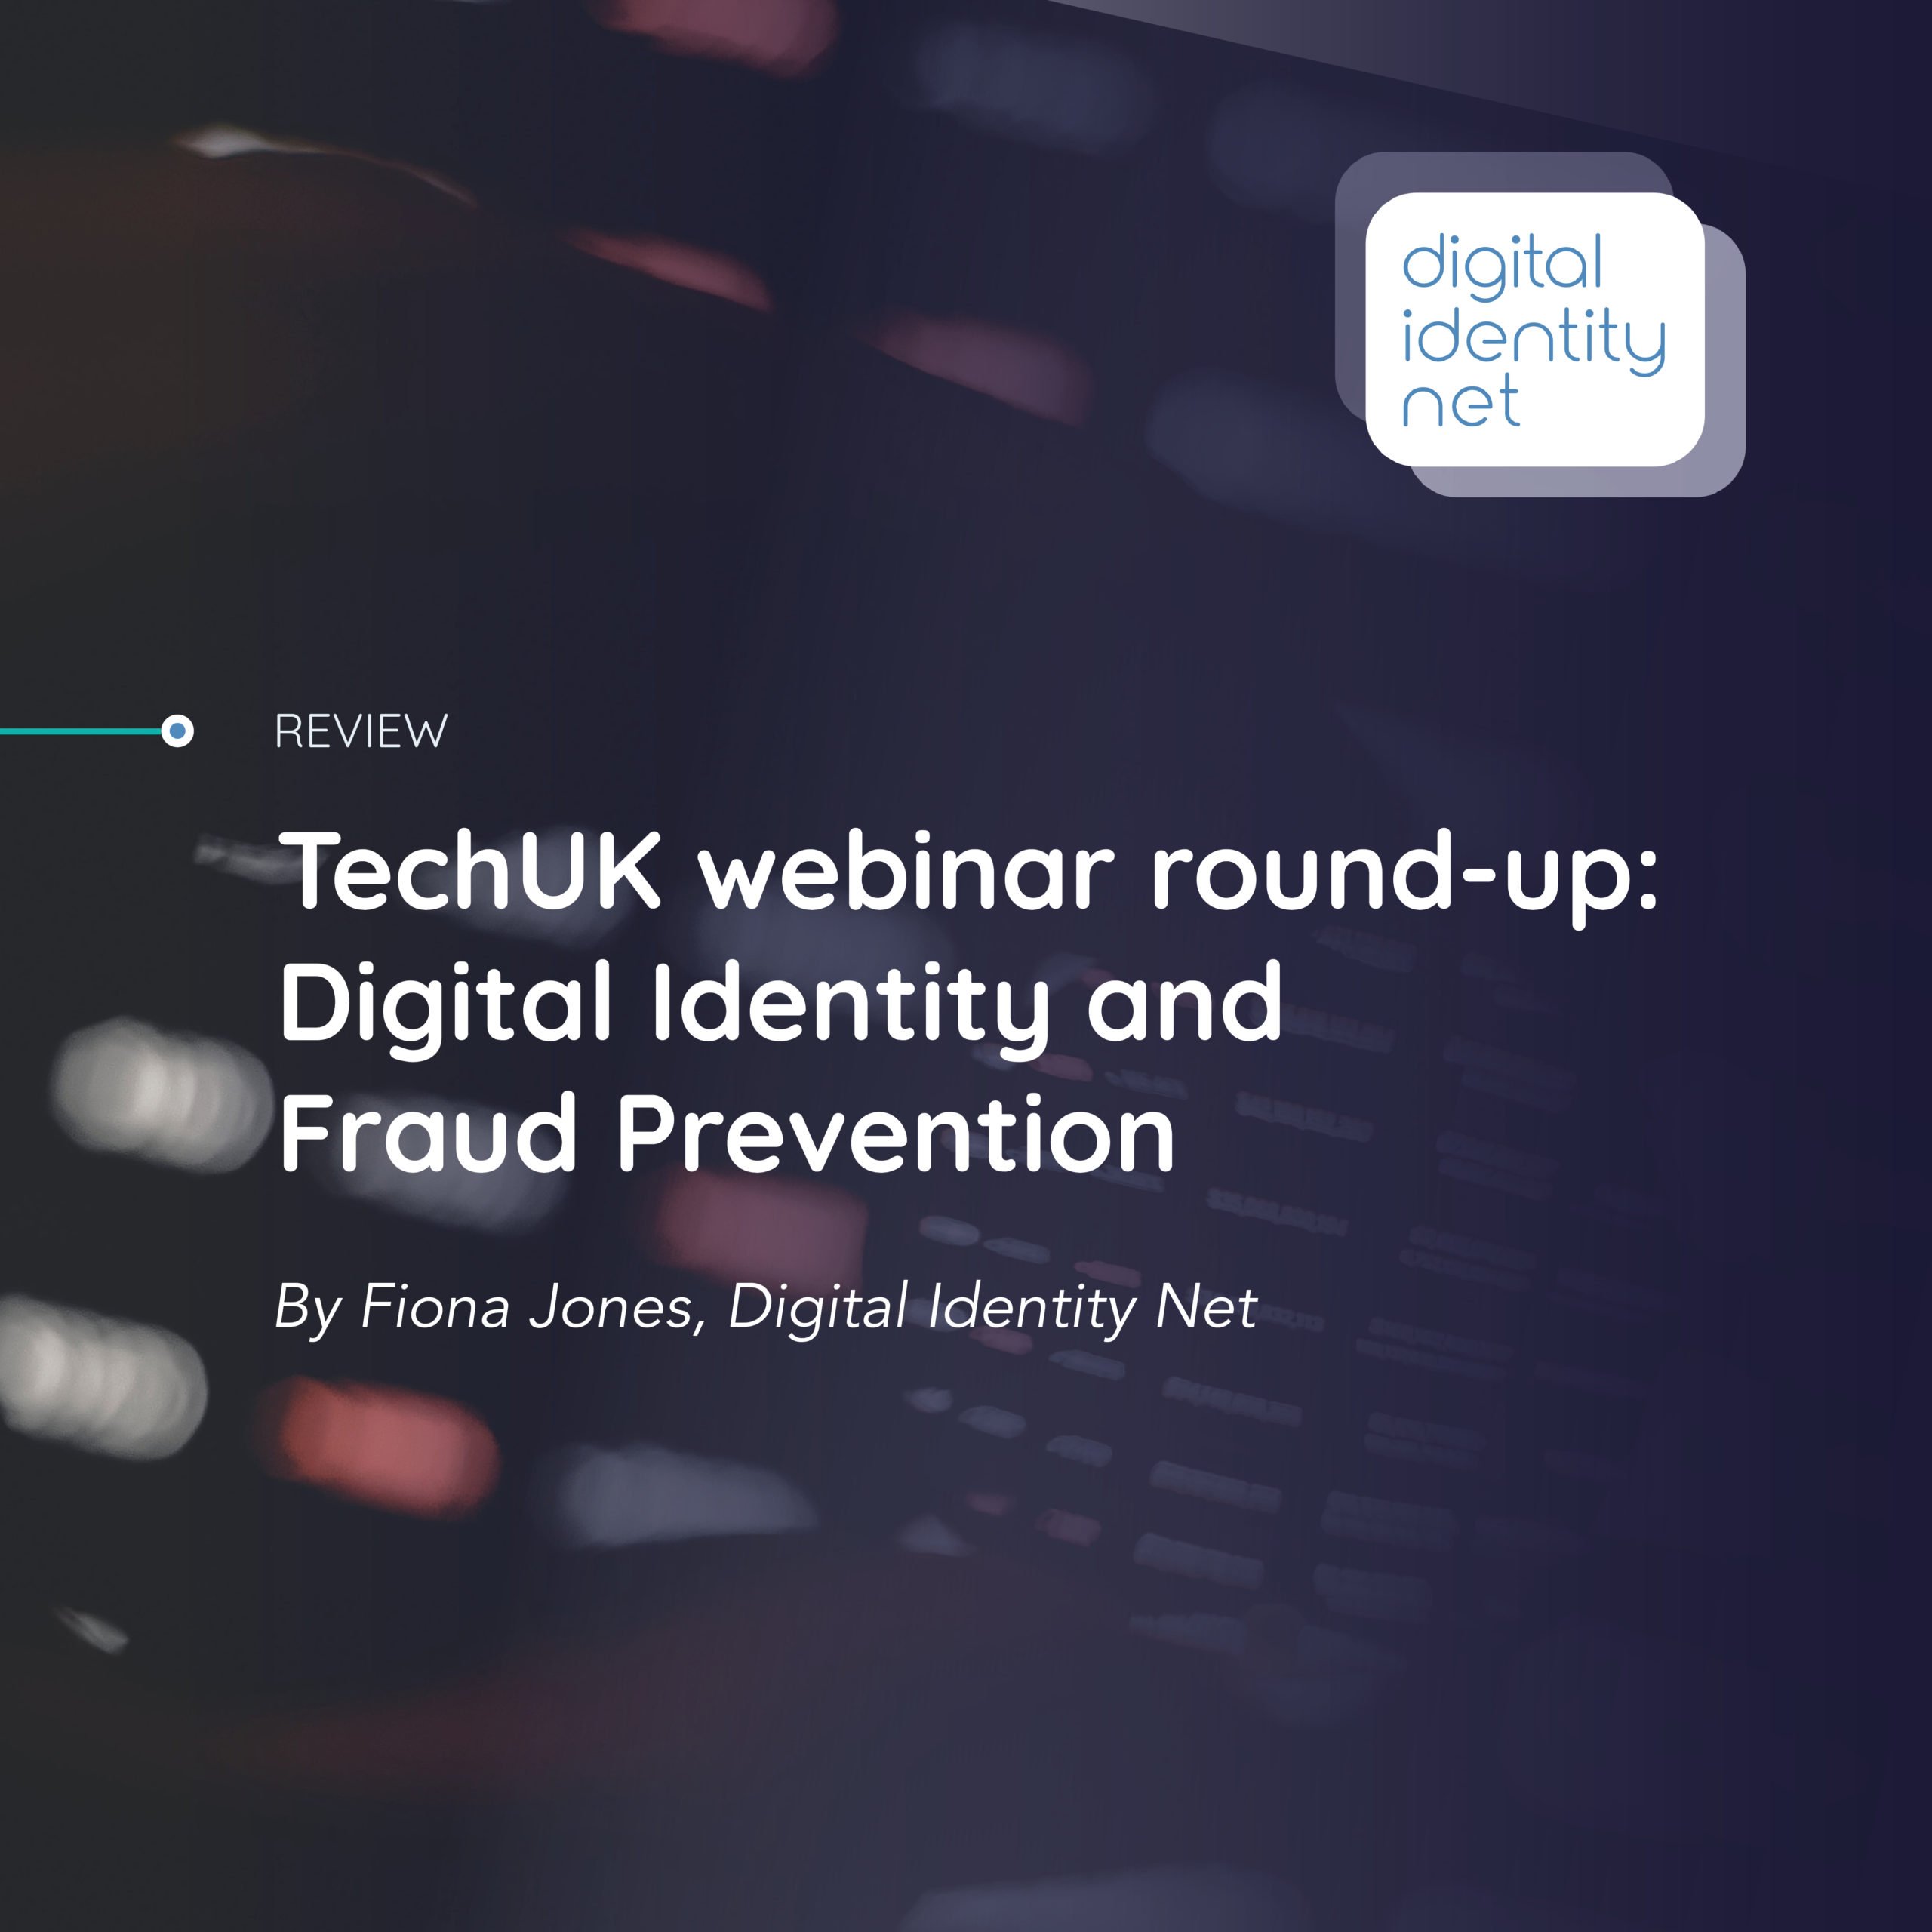 TechUK webinar round-up: Digital Identity and Fraud Prevention